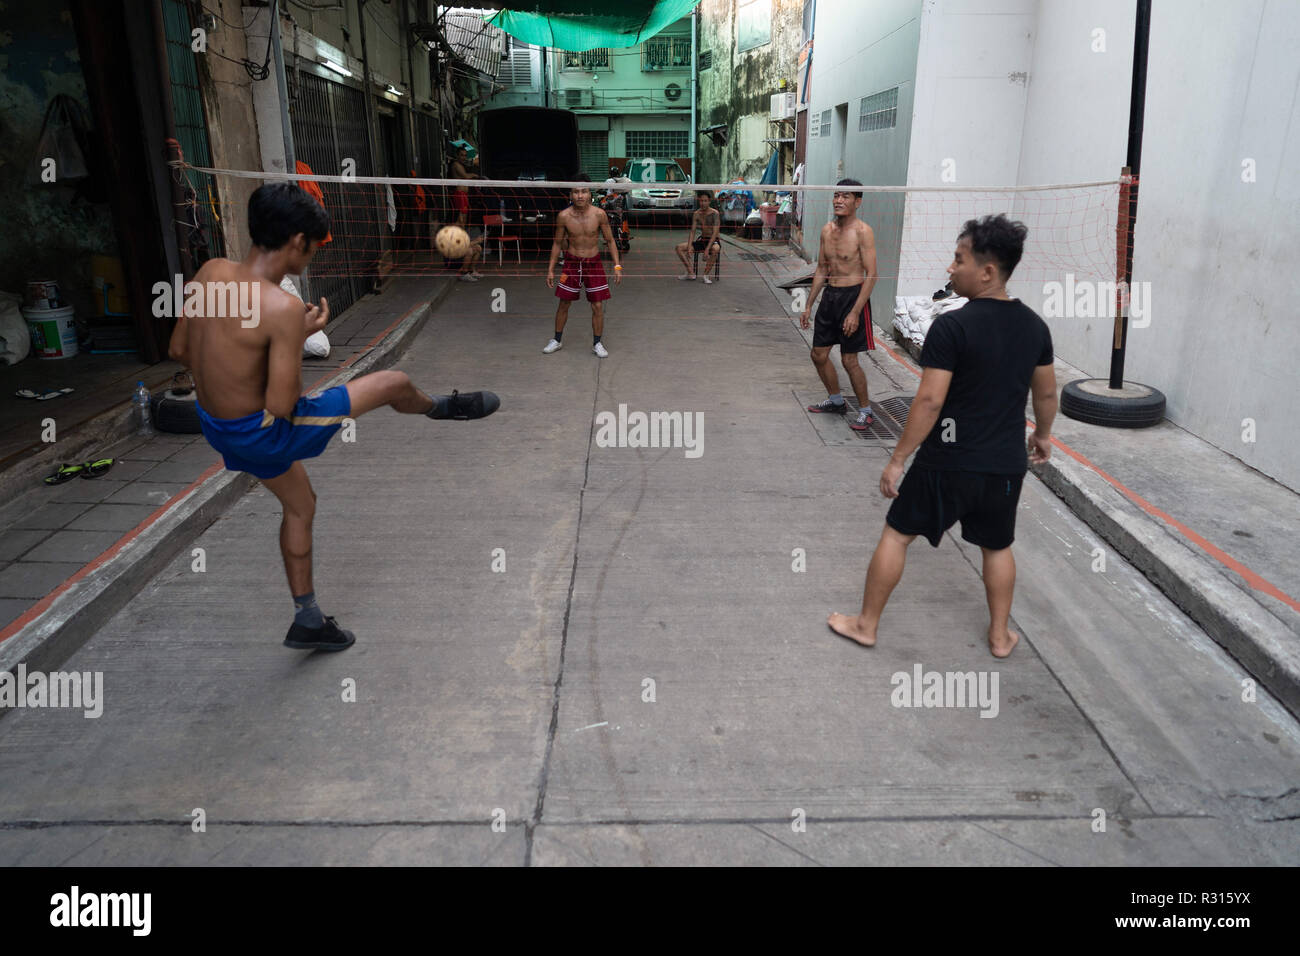 Bangkok, Pathum Thani, Thailand. 19th Nov, 2018. Men seen playing Sepak takraw or foot volleyball in Chinatown, Bangkok, Thailand.Daily life in Bangkok capital of Thailand. Credit: Enzo Tomasiello/SOPA Images/ZUMA Wire/Alamy Live News Stock Photo